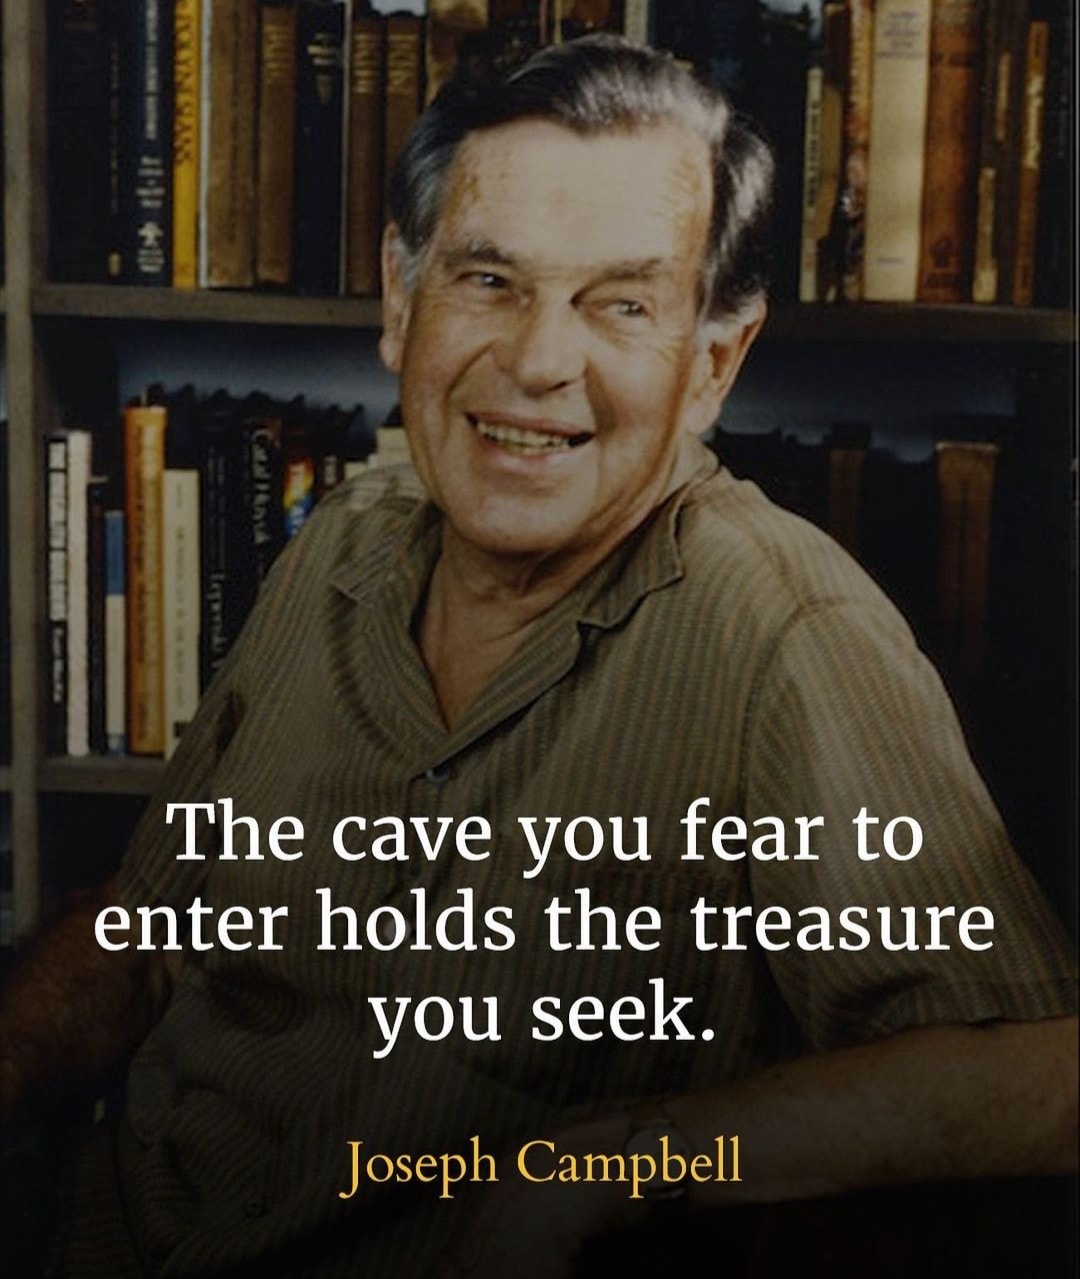 The cave you fear to enter holds the treasure you seek.